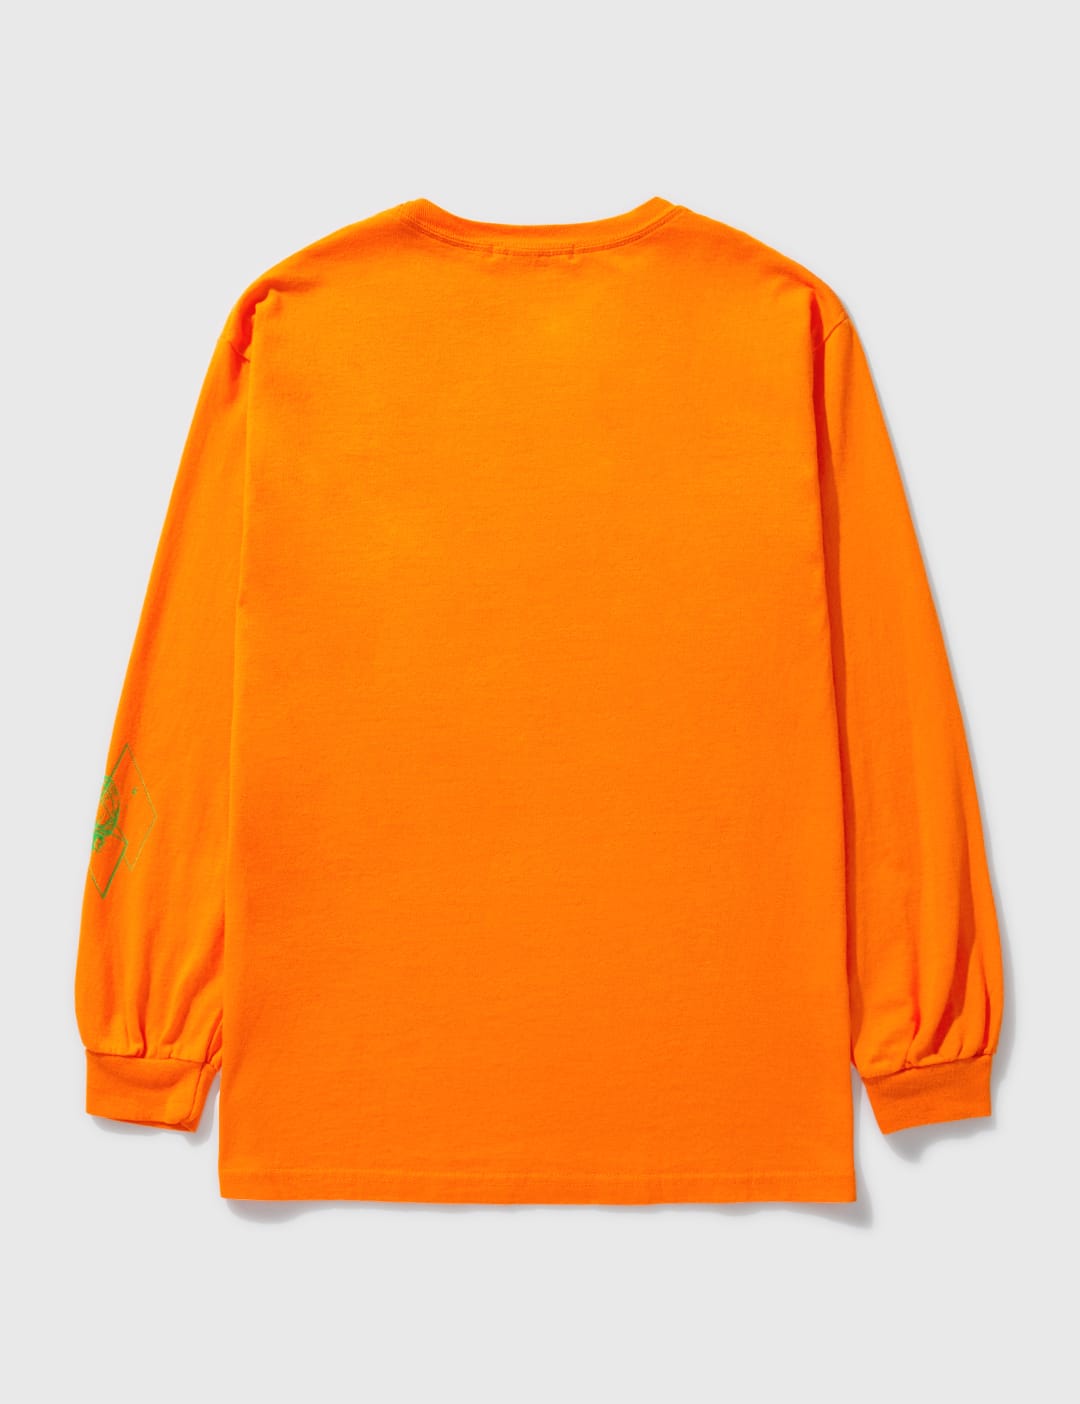 Flagstuff - Surprise Long Sleeve T-shirt | HBX - Globally Curated